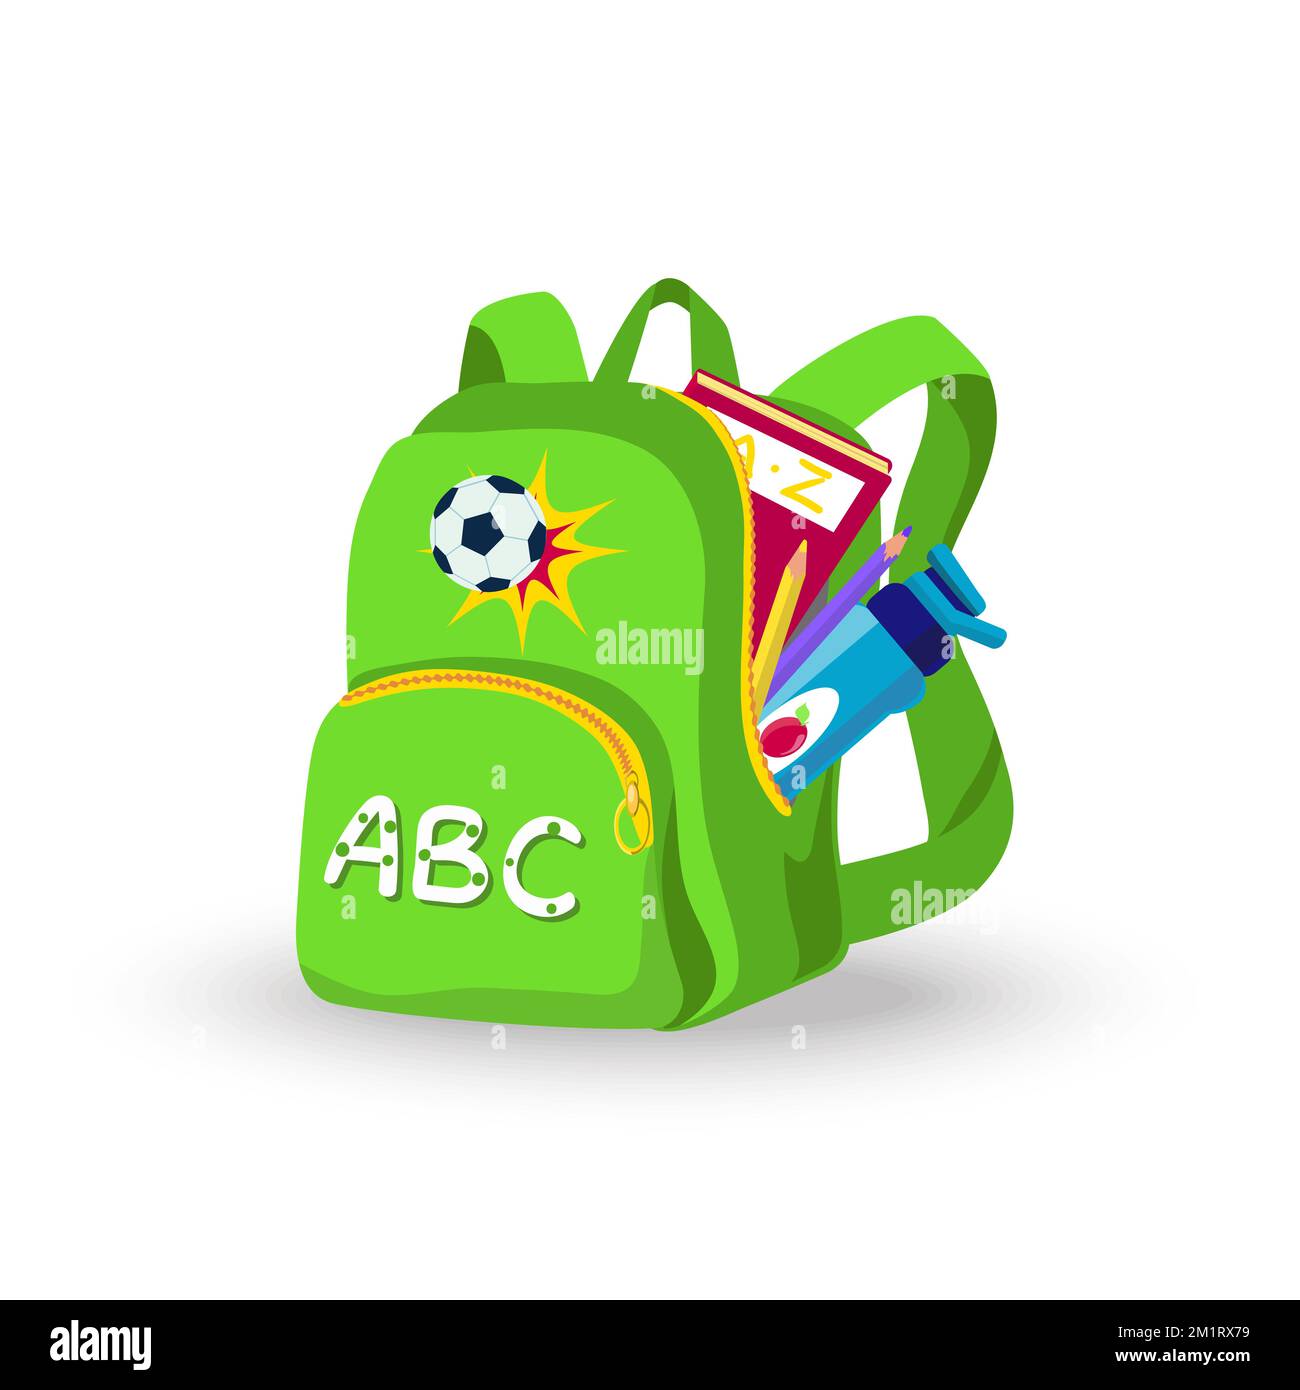 School backpack, green, with football goal symbol Stock Vector